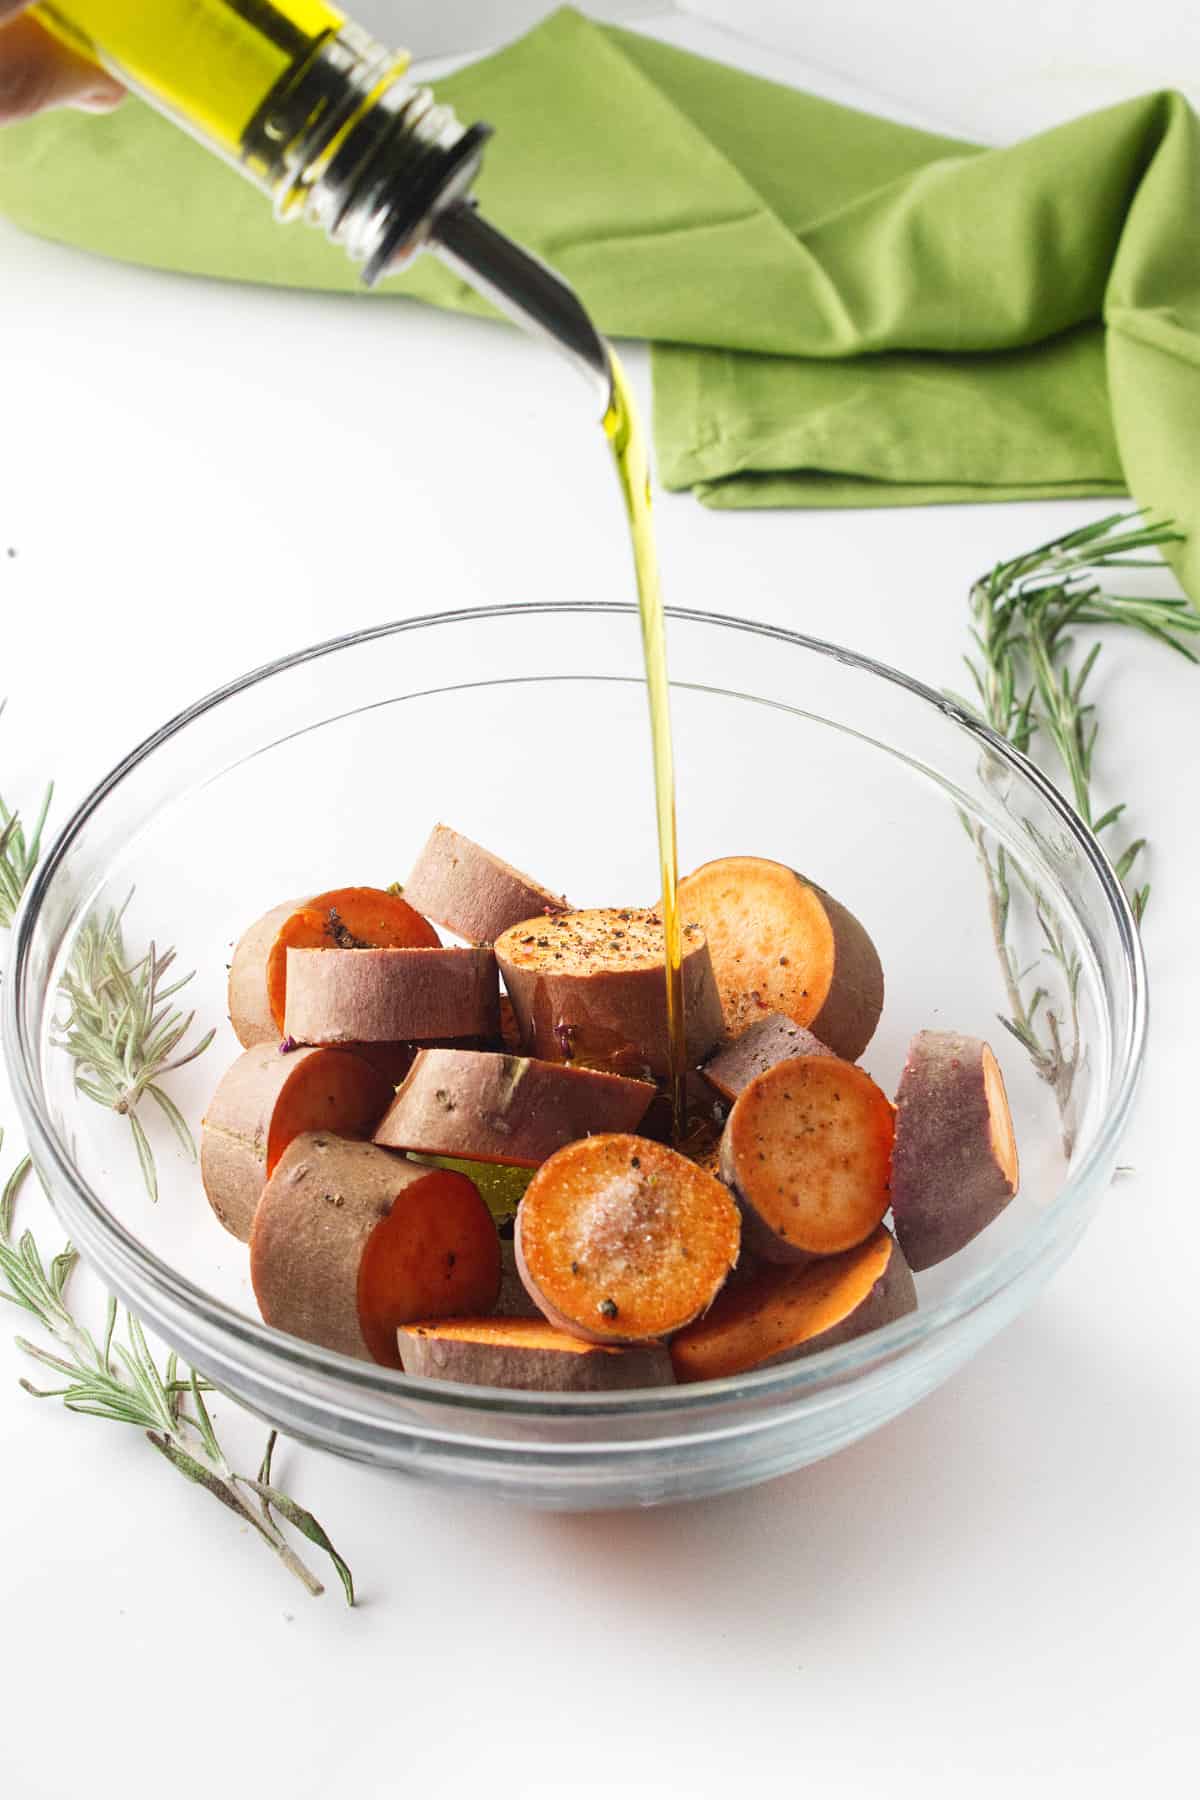 sliced sweet potatoes drizzled with olive oil.